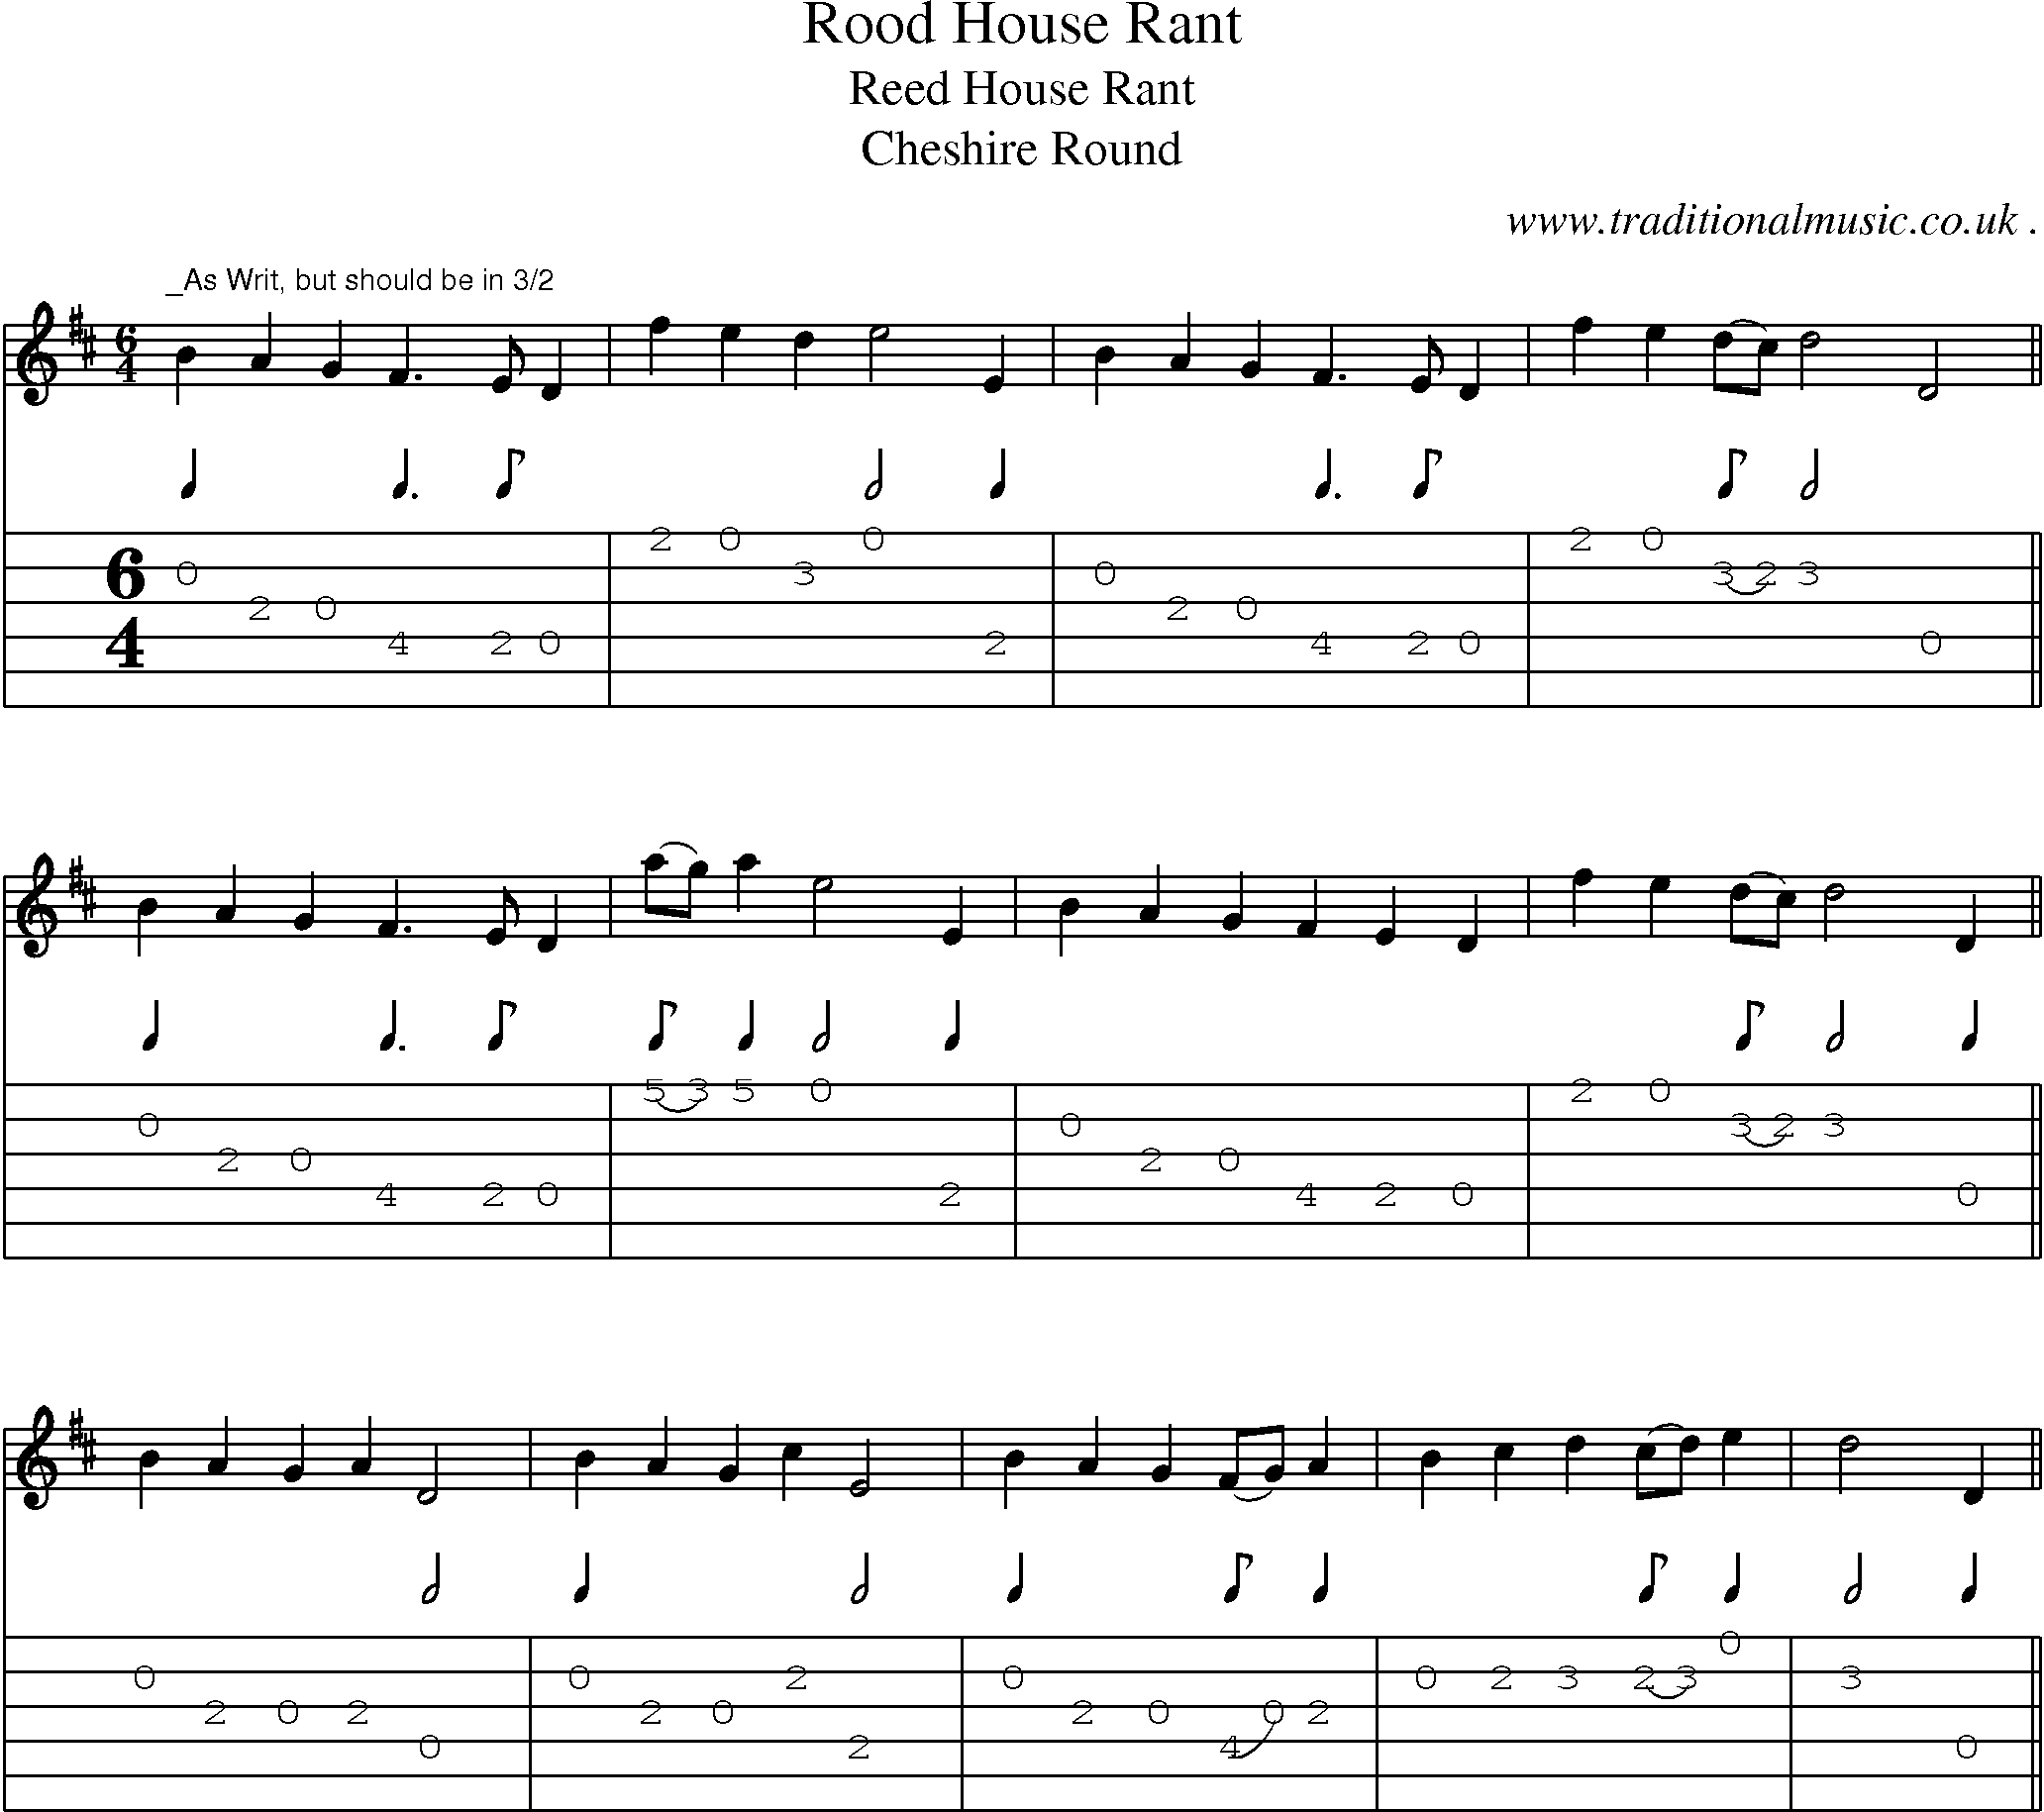 Sheet-Music and Guitar Tabs for Rood House Rant